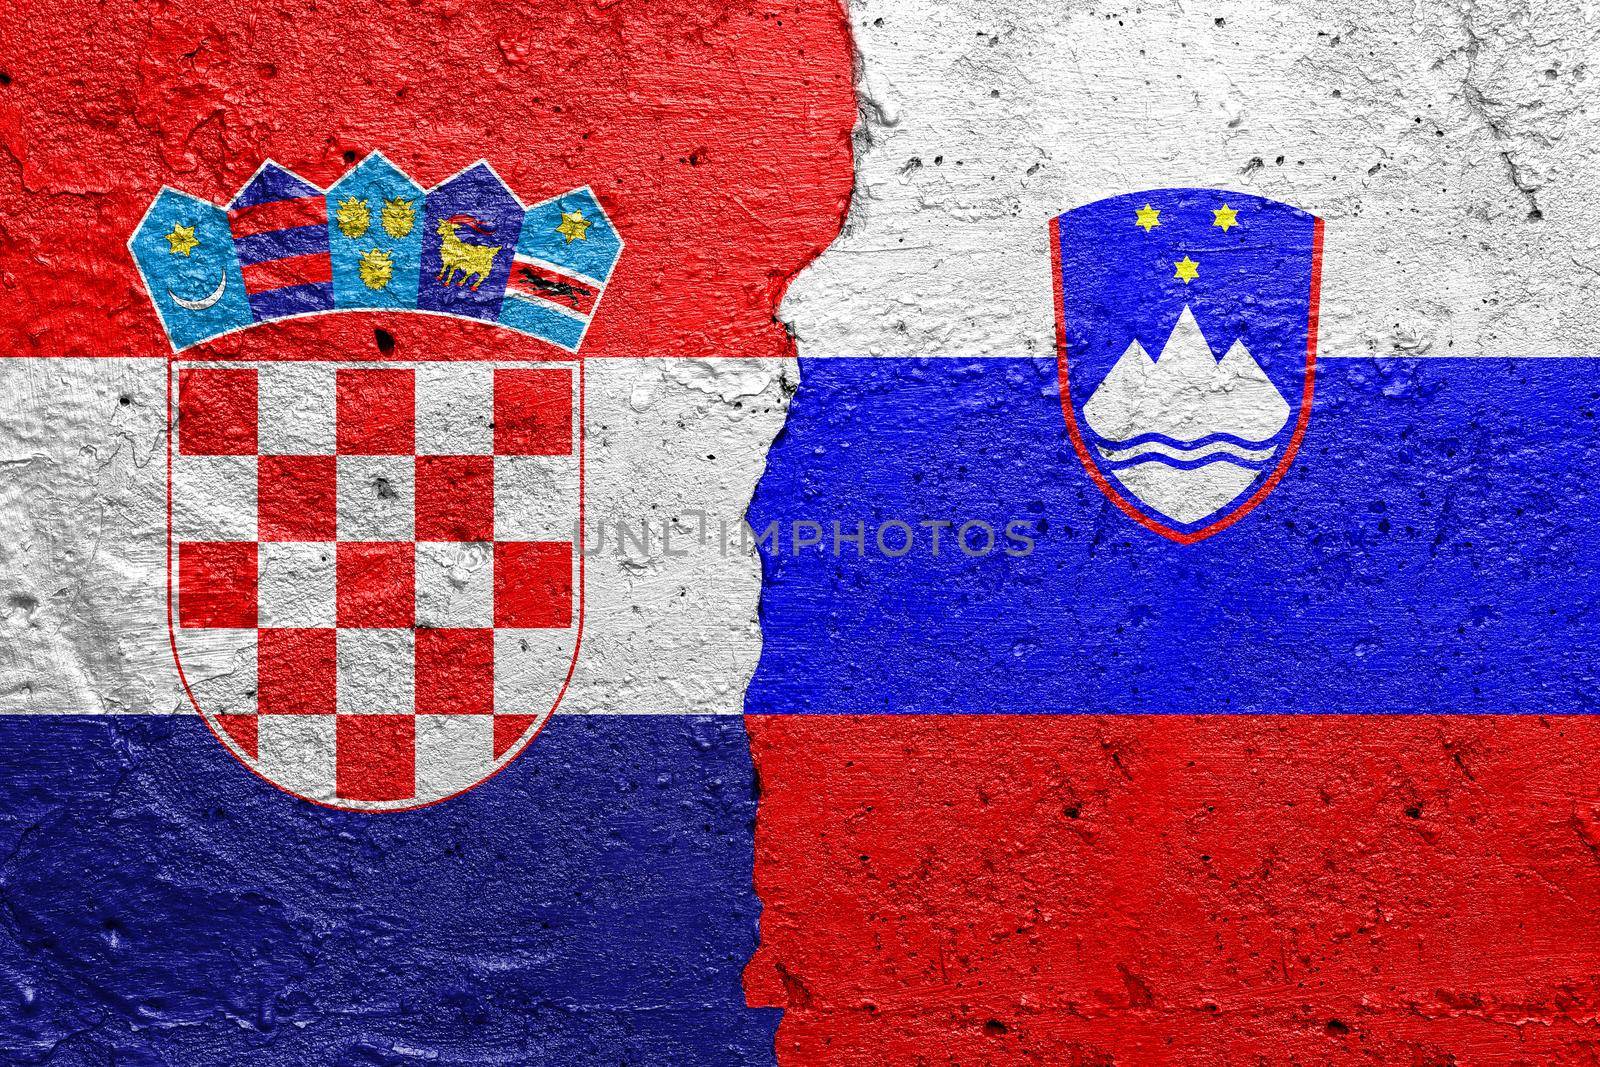 Croatia and Slovenia - Cracked concrete wall painted with a Croatian flag on the left and a Slovenian flag on the right